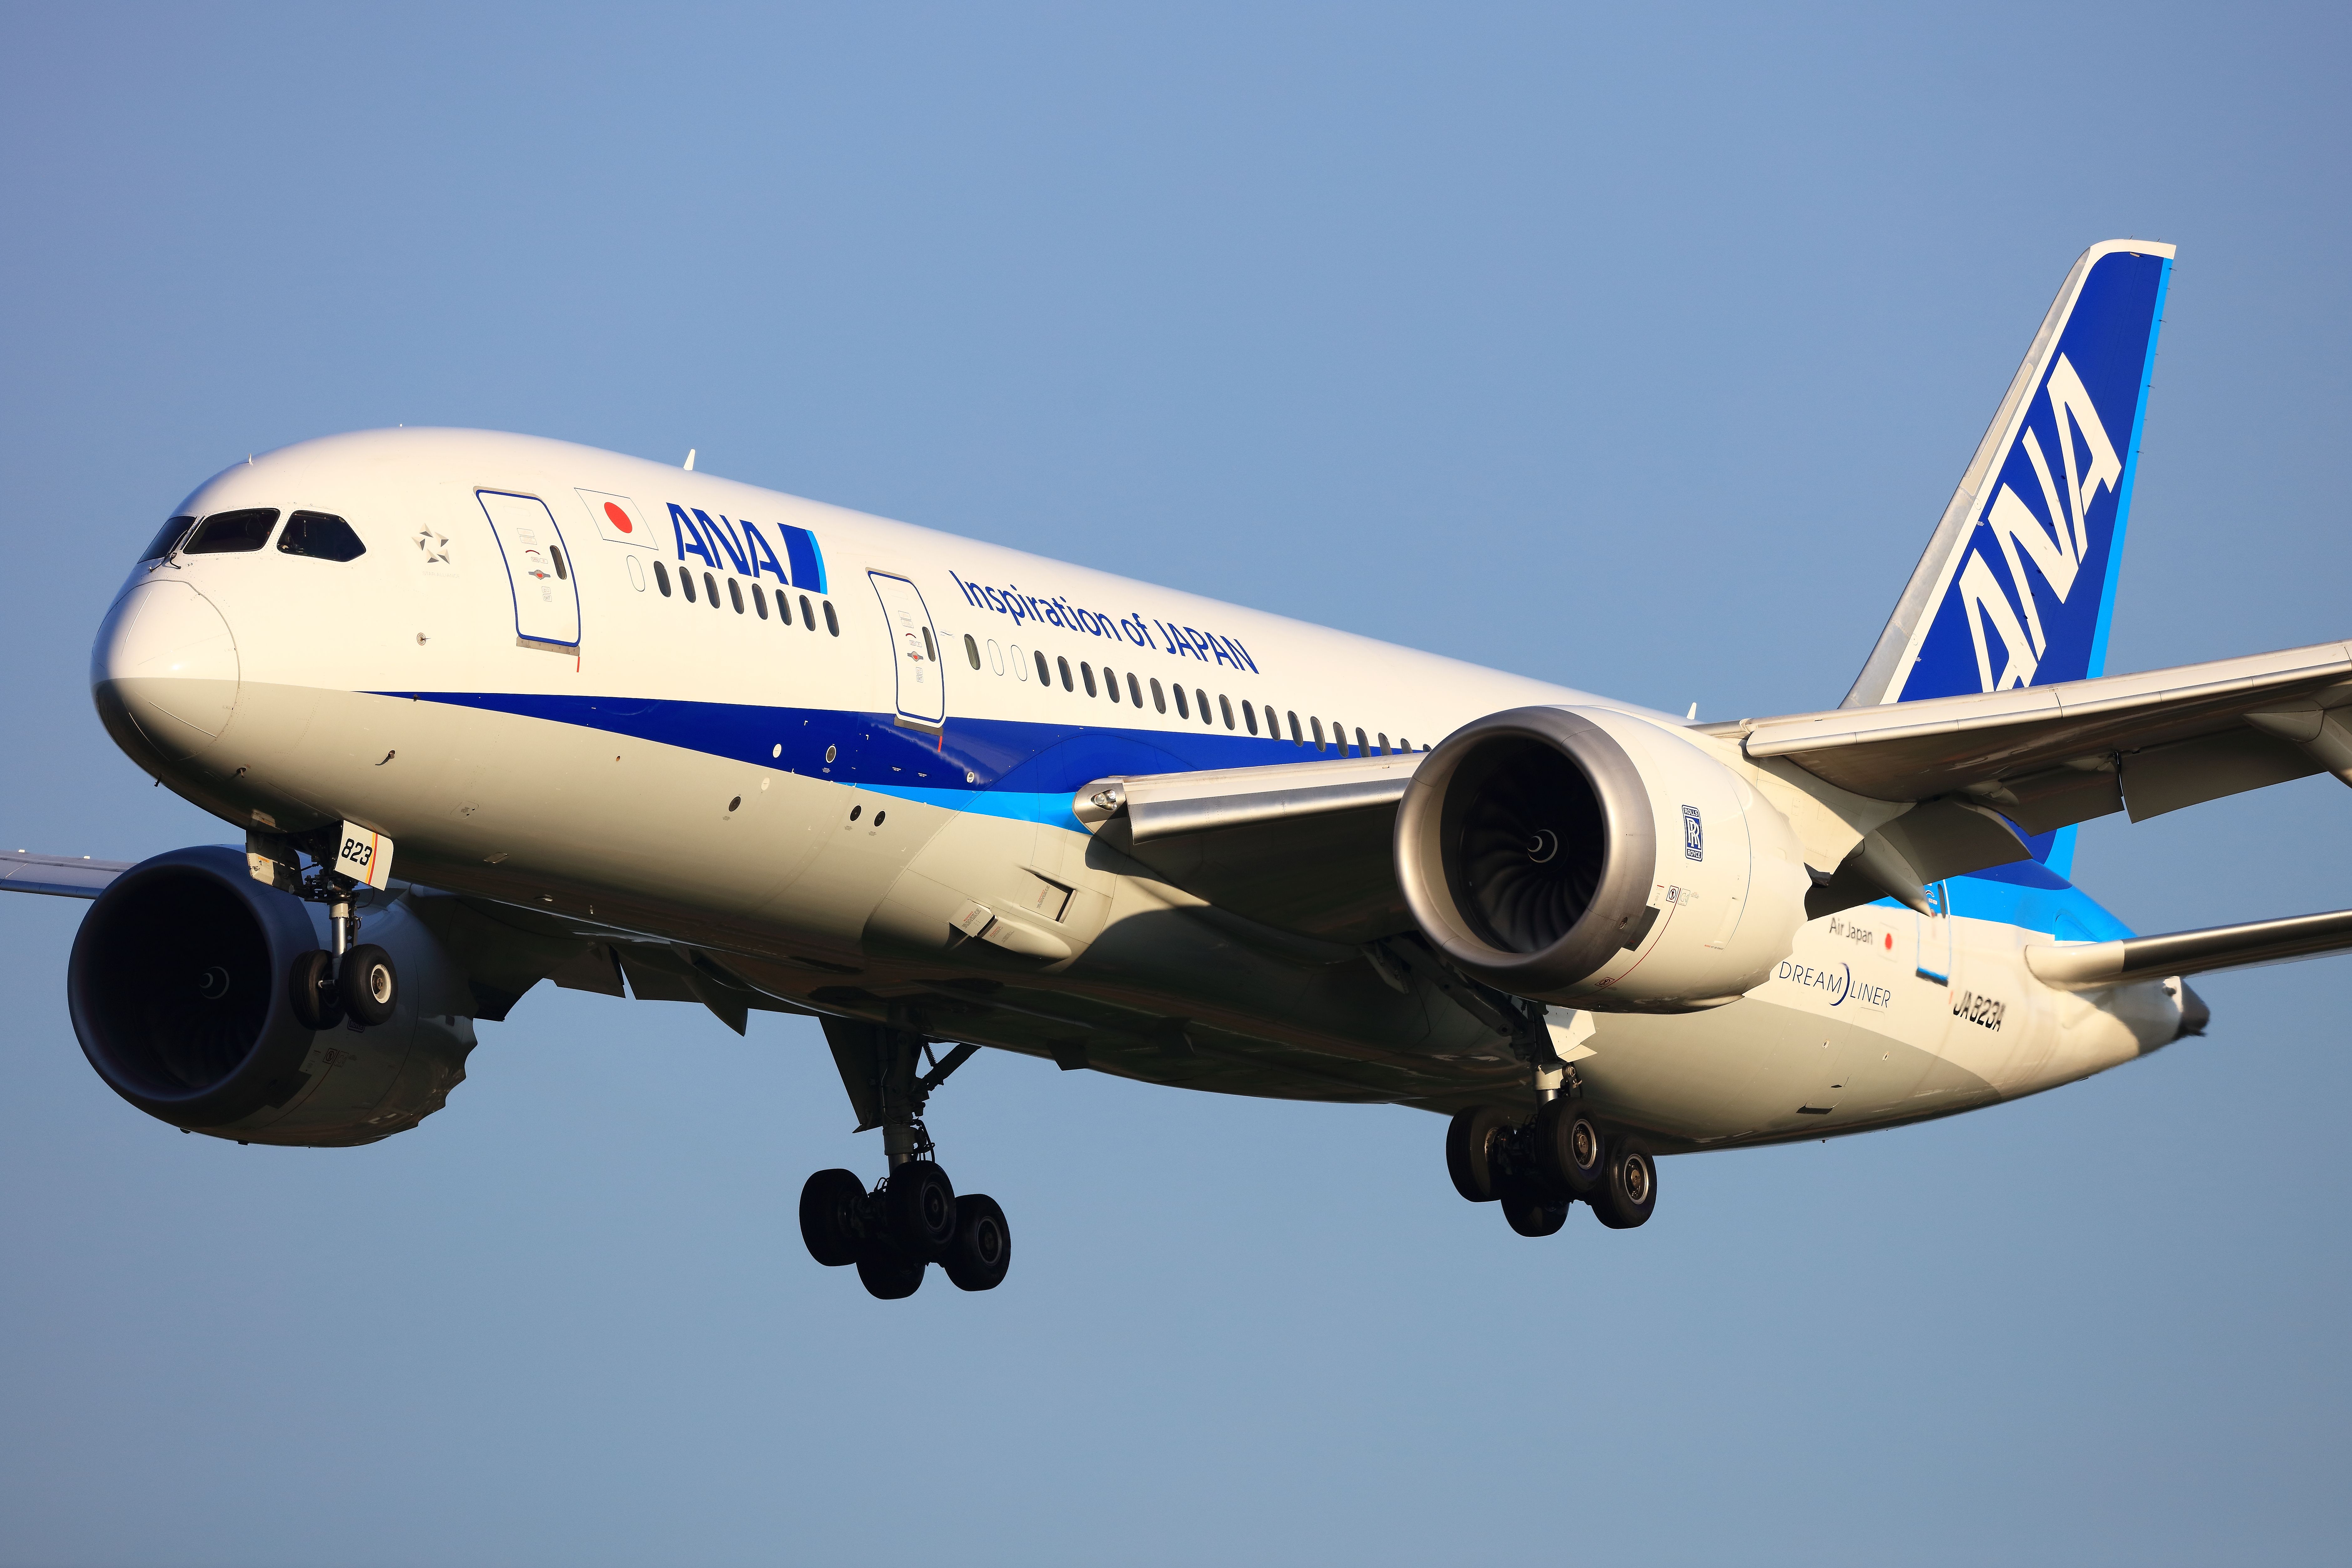 An All Nippon Airways Boeing 787 flying in the sky.